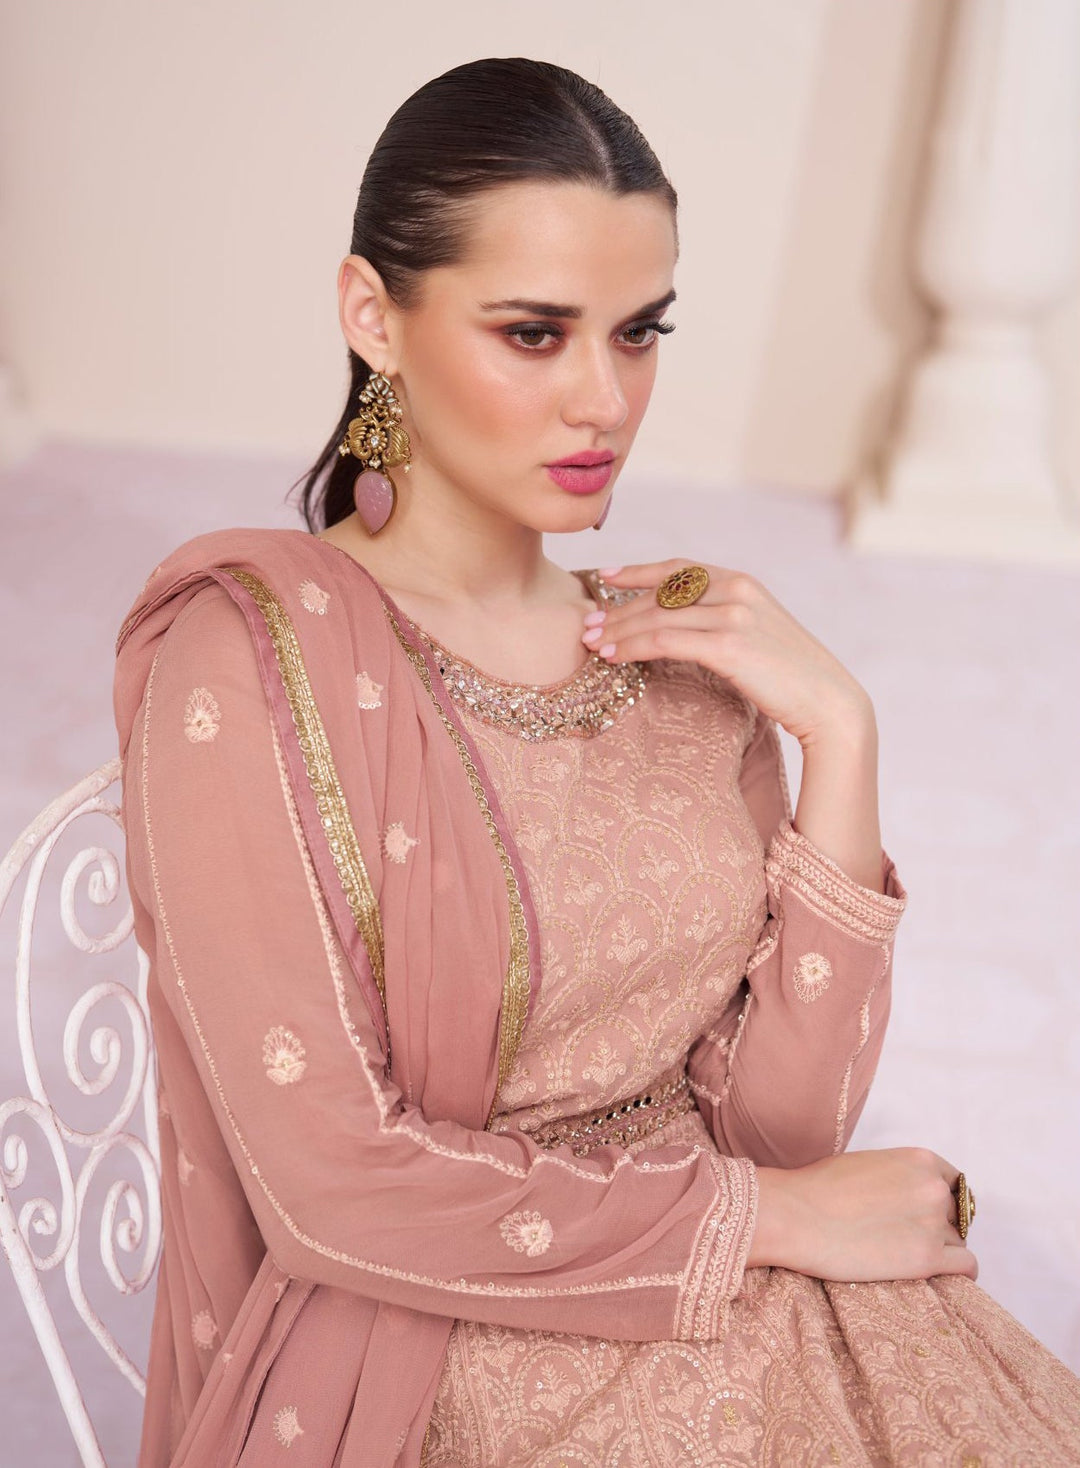 Elegant Pink Georgette Gown for Weddings and Parties - True Grace and Beauty!